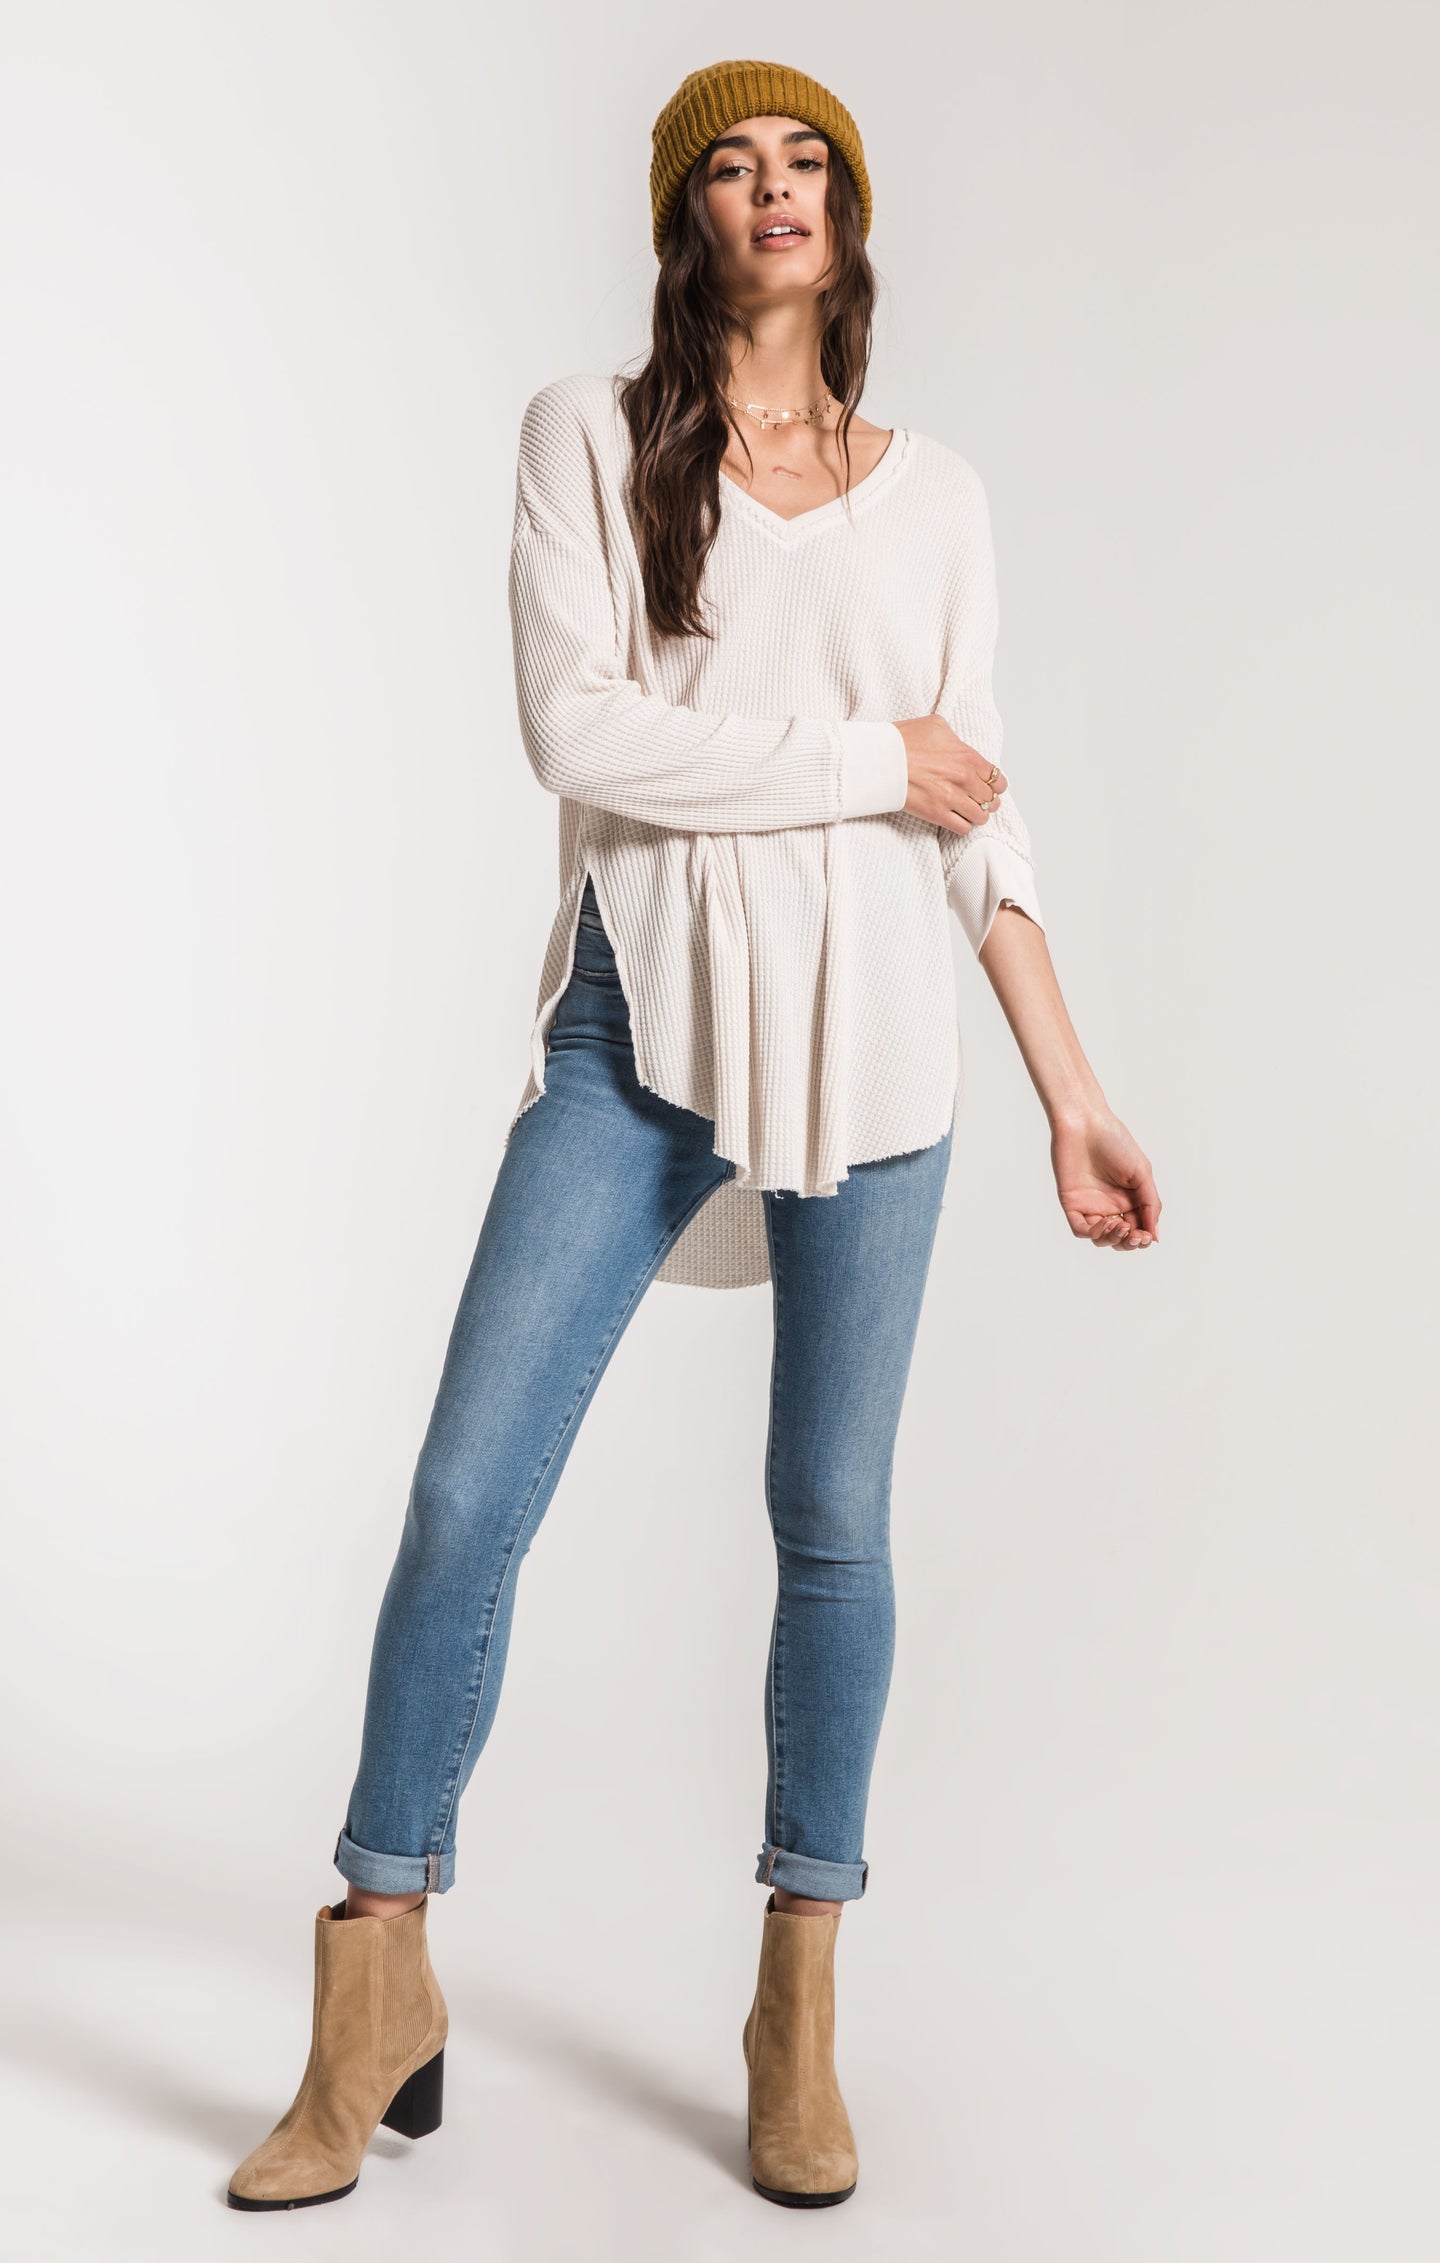 The Waffle Thermal Tunic Top